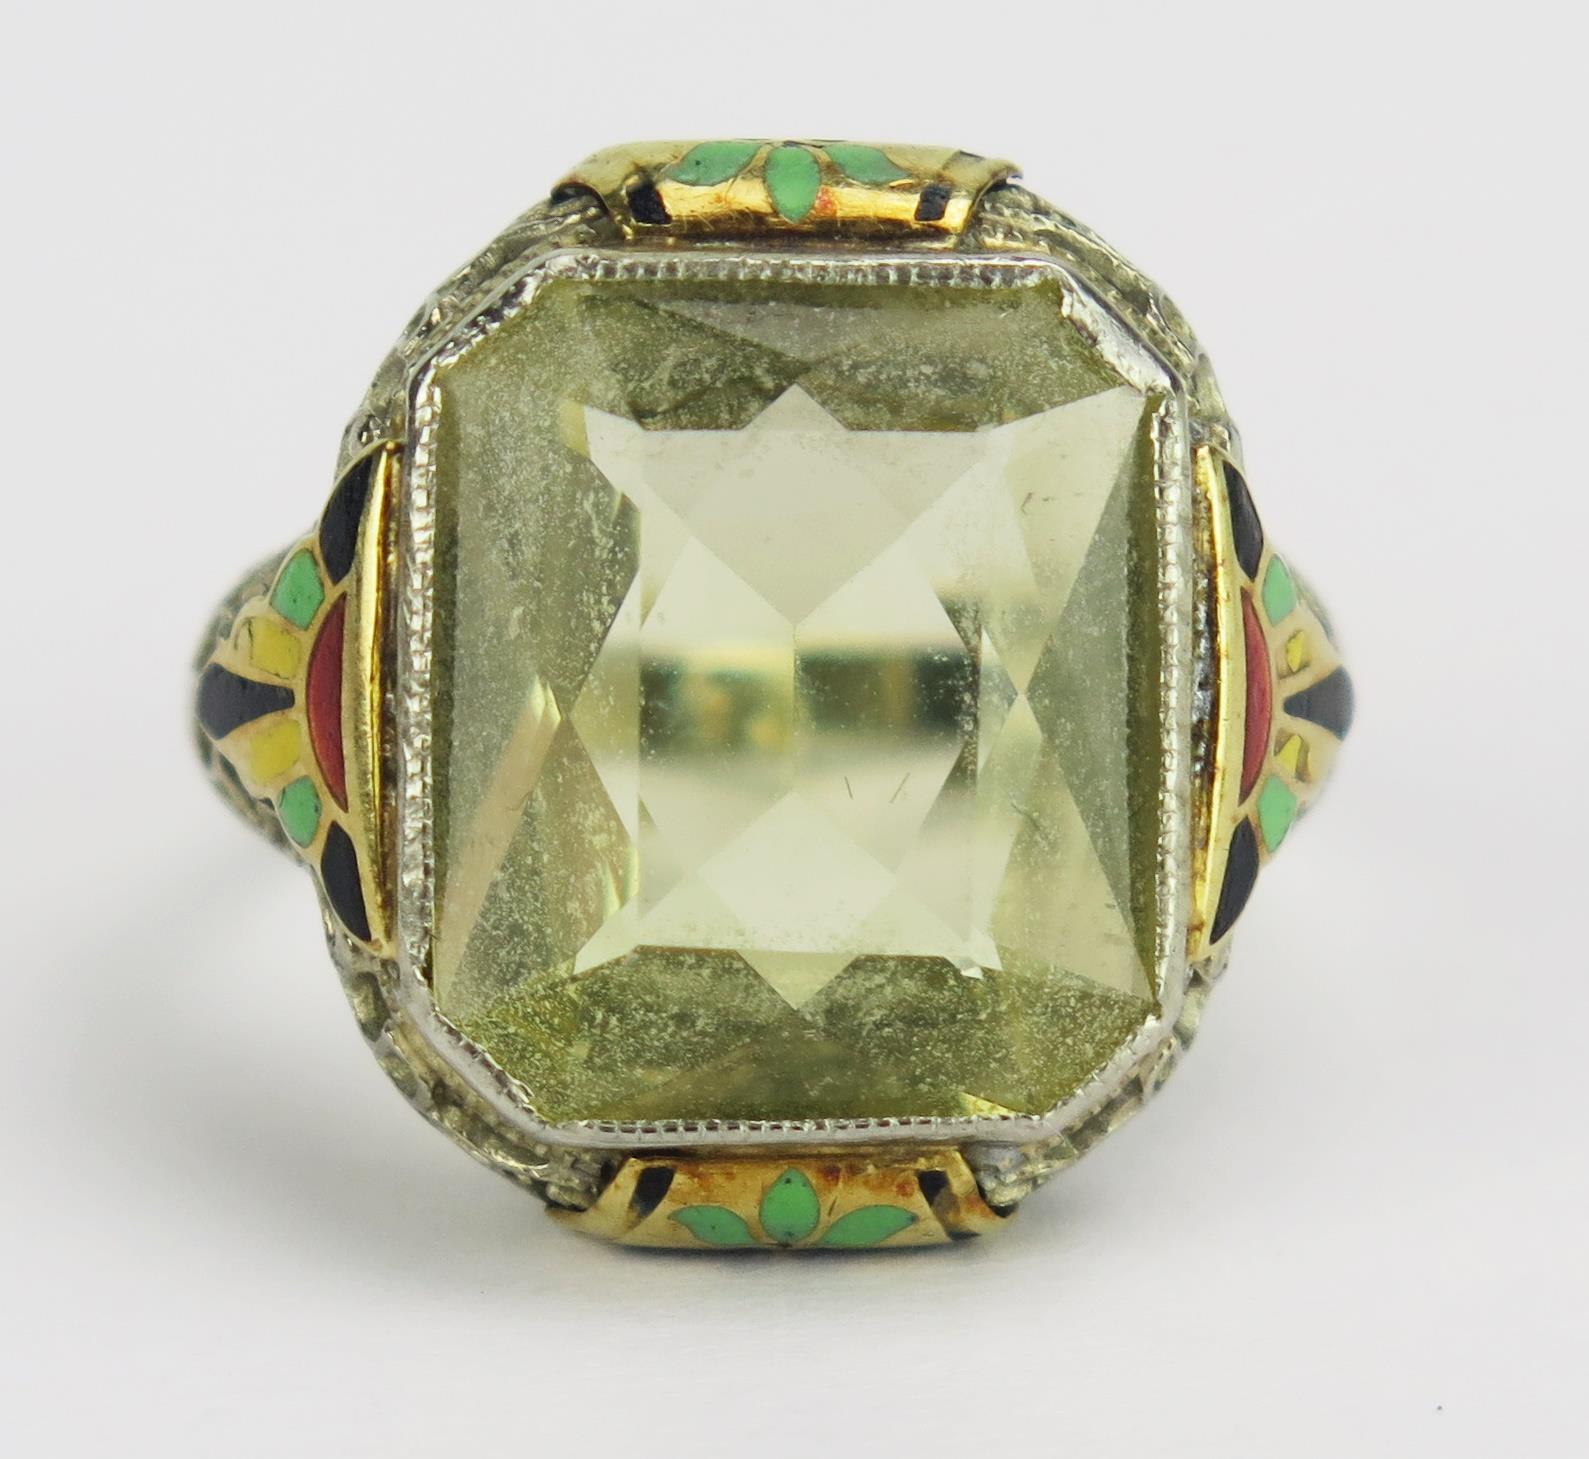 A White Gold, Citrine and Enamel Ring in an ornate pierced setting, 13.3x11.8mm stone, size H,